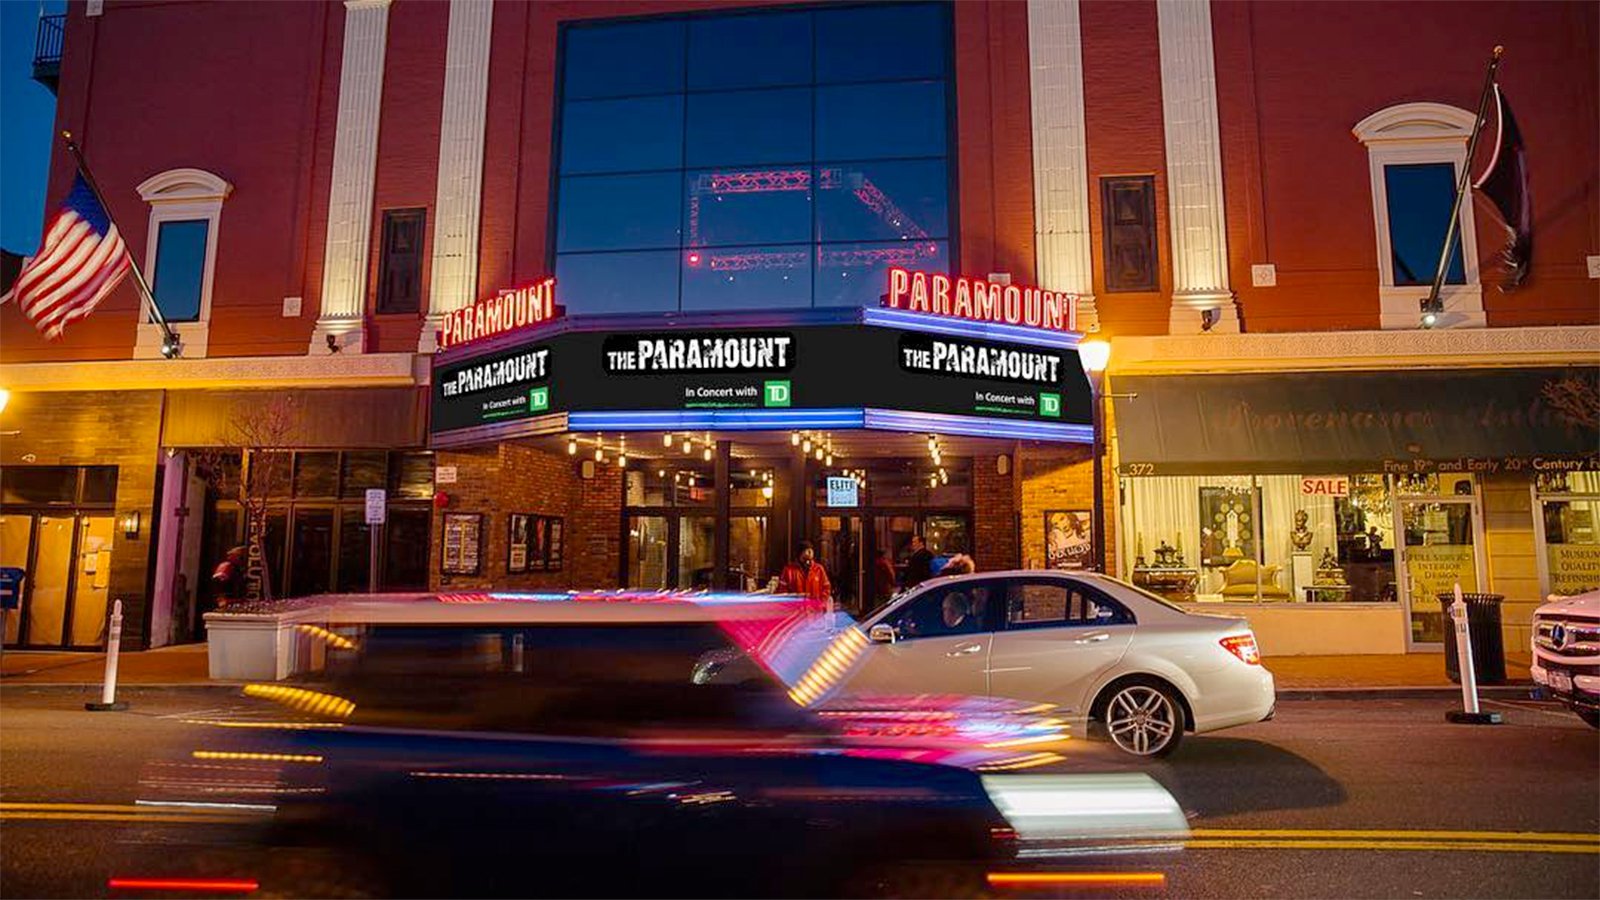 The Paramount makes list of top 5 club venues • The Long Island Times